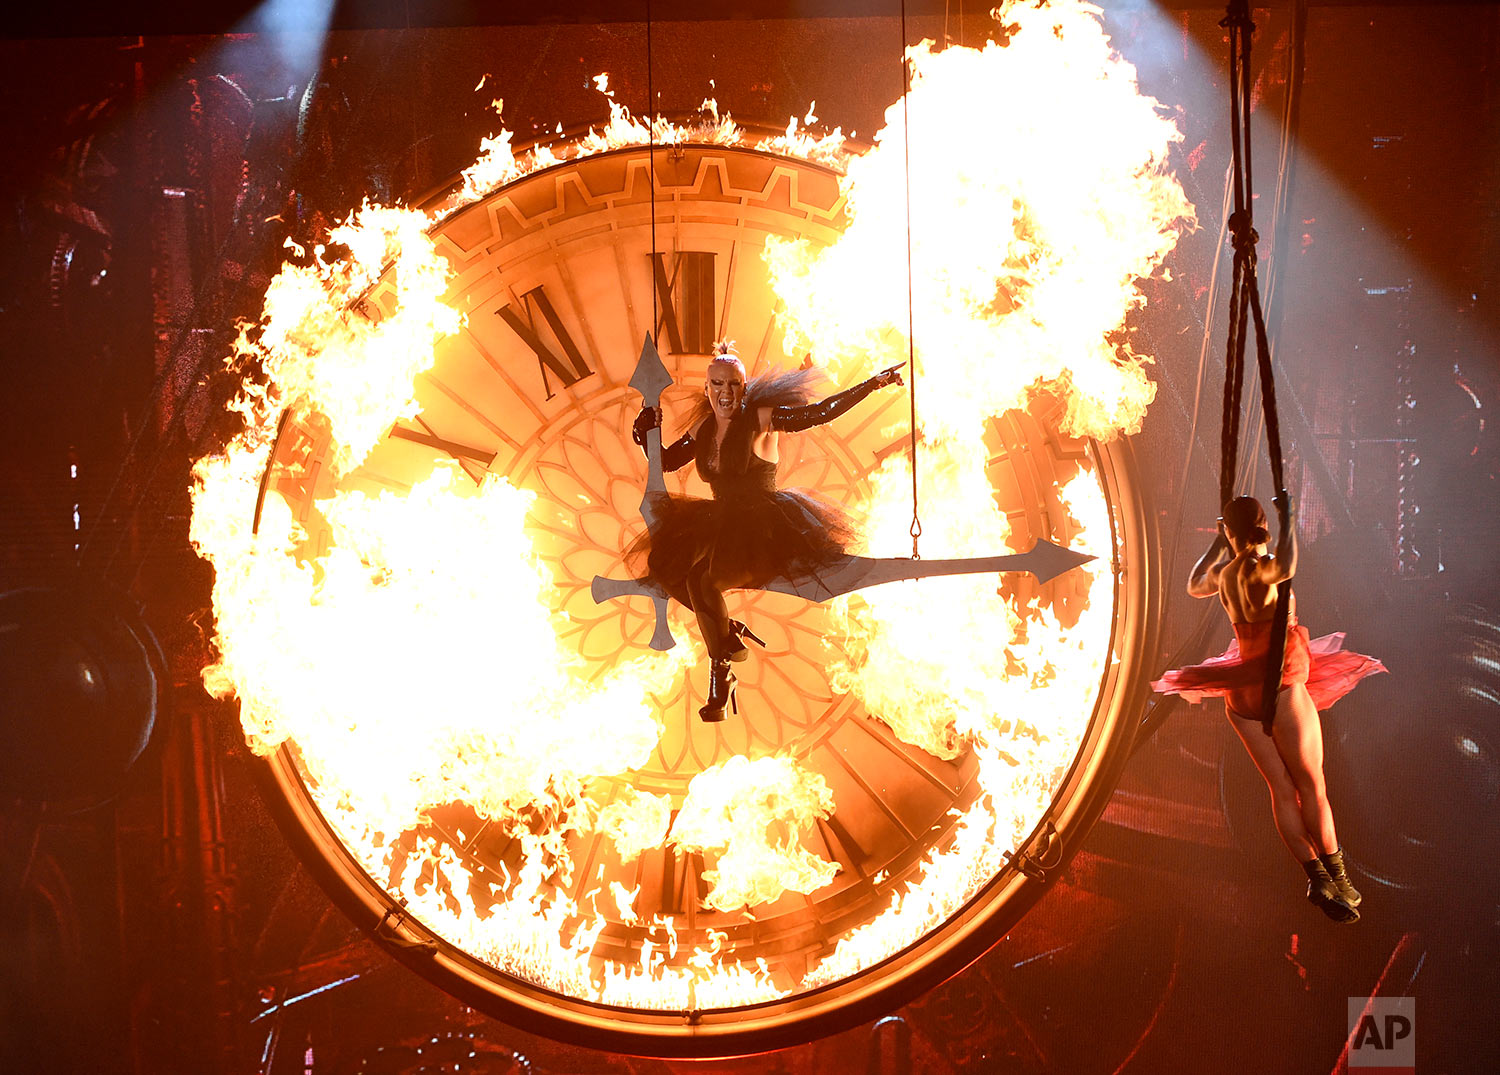  Pink performs “Just Like Fire” at the Billboard Music Awards at the T-Mobile Arena on Sunday, May 22, 2016, in Las Vegas. (Photo by Chris Pizzello/Invision/AP) 